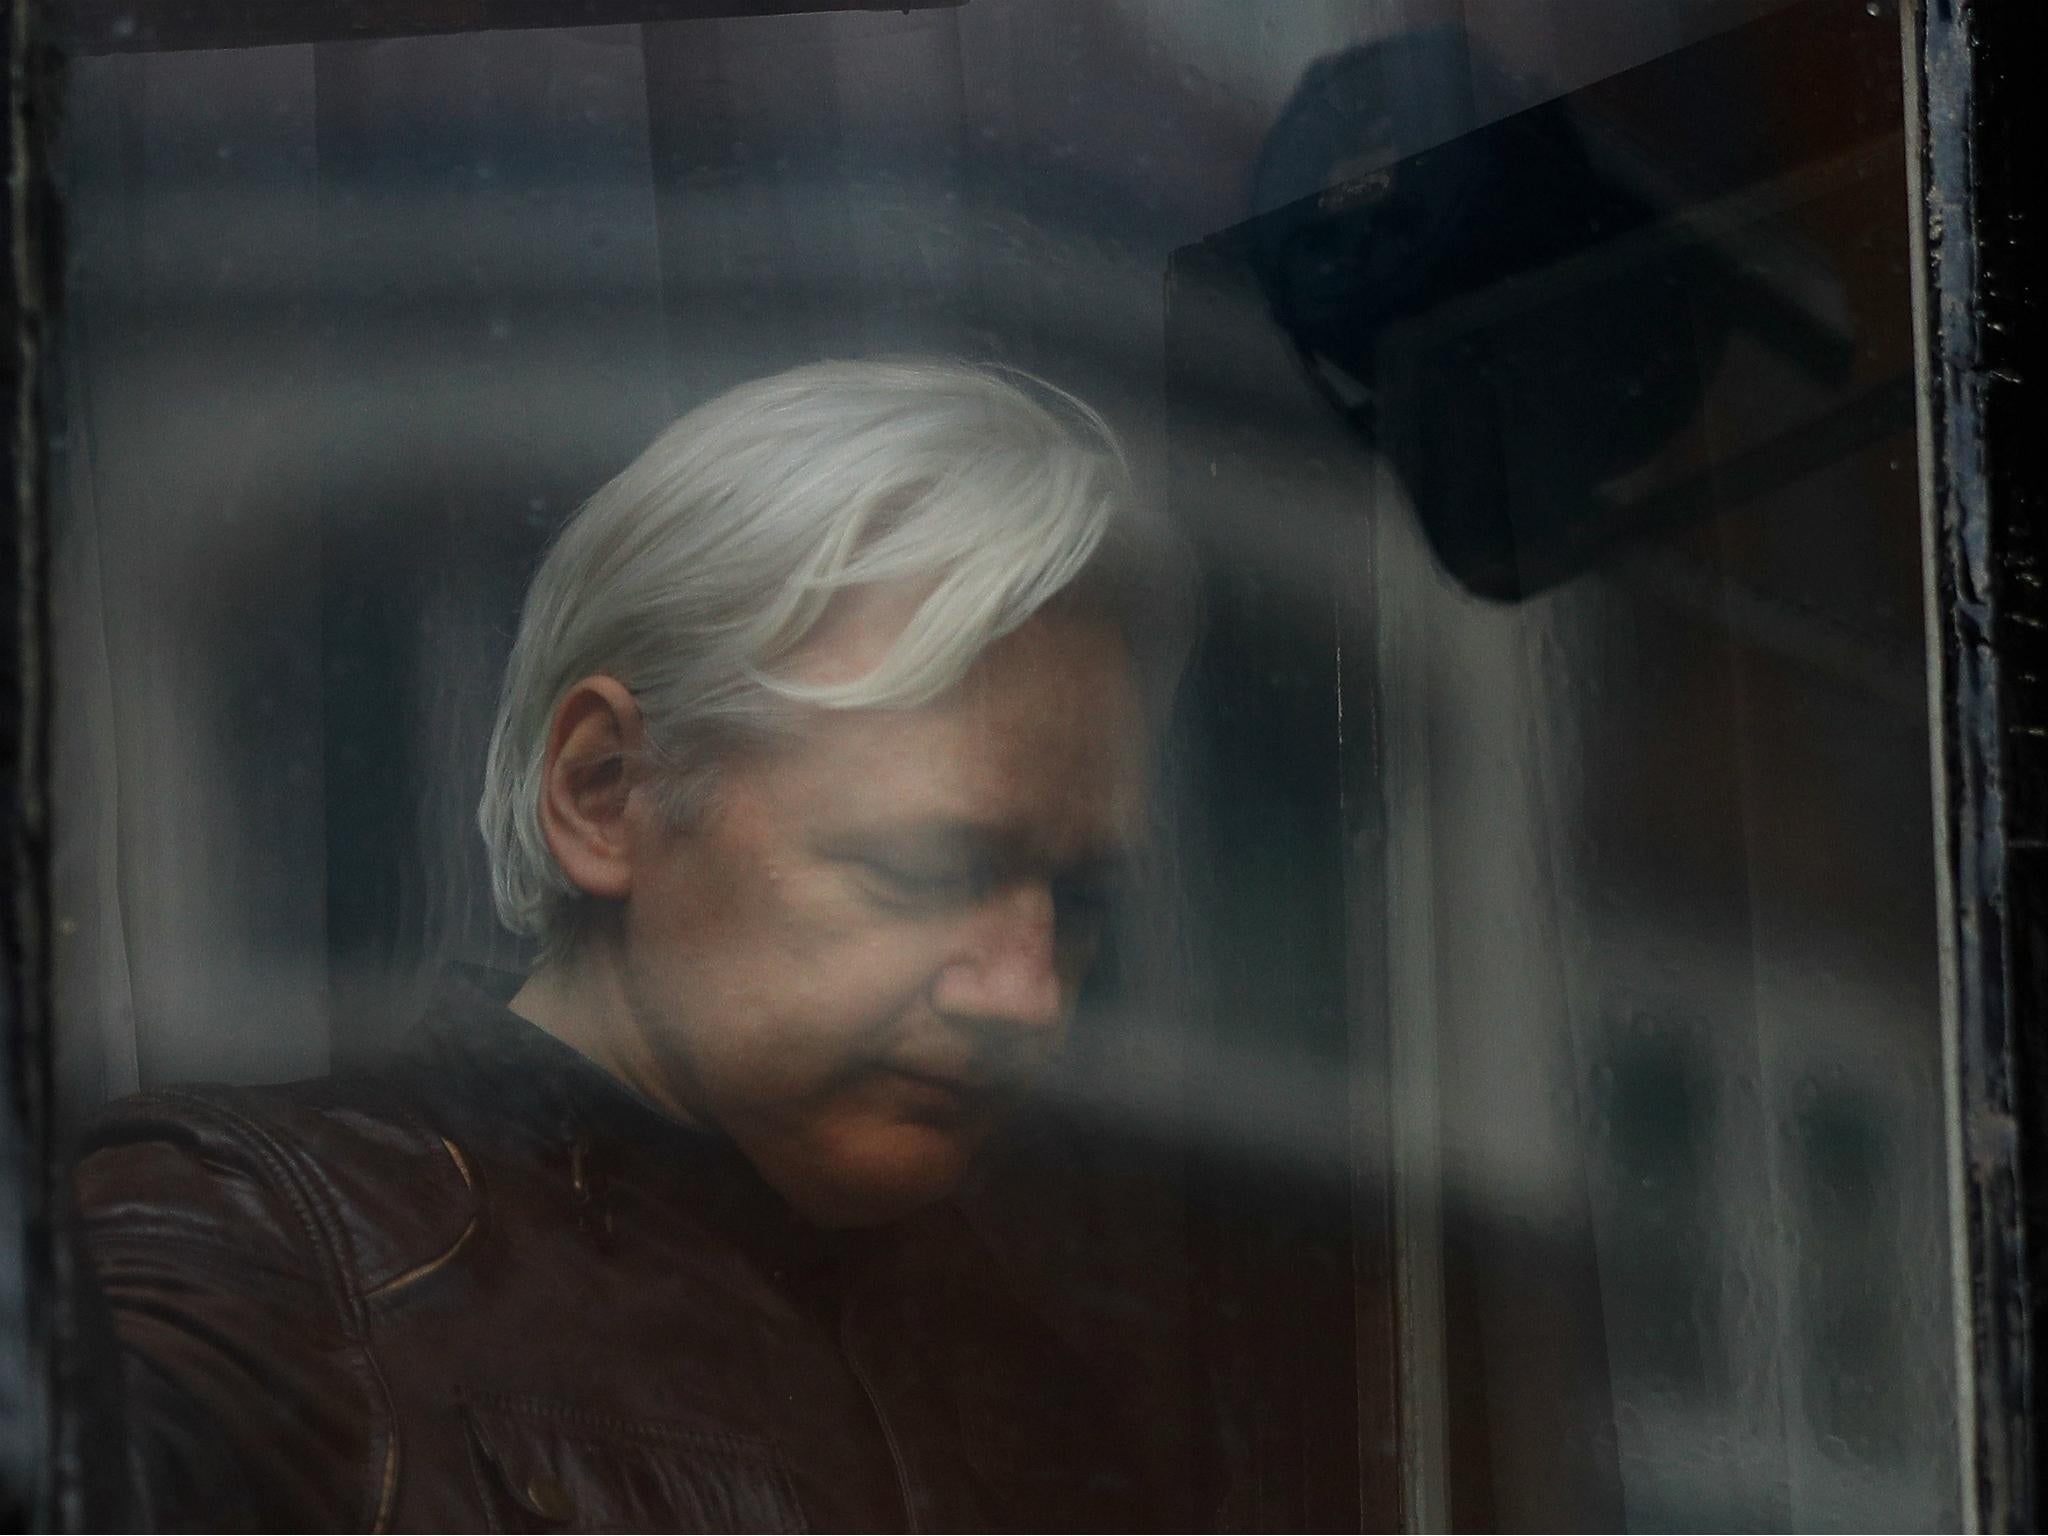 Julian Assange: What is his current legal predicament? How 